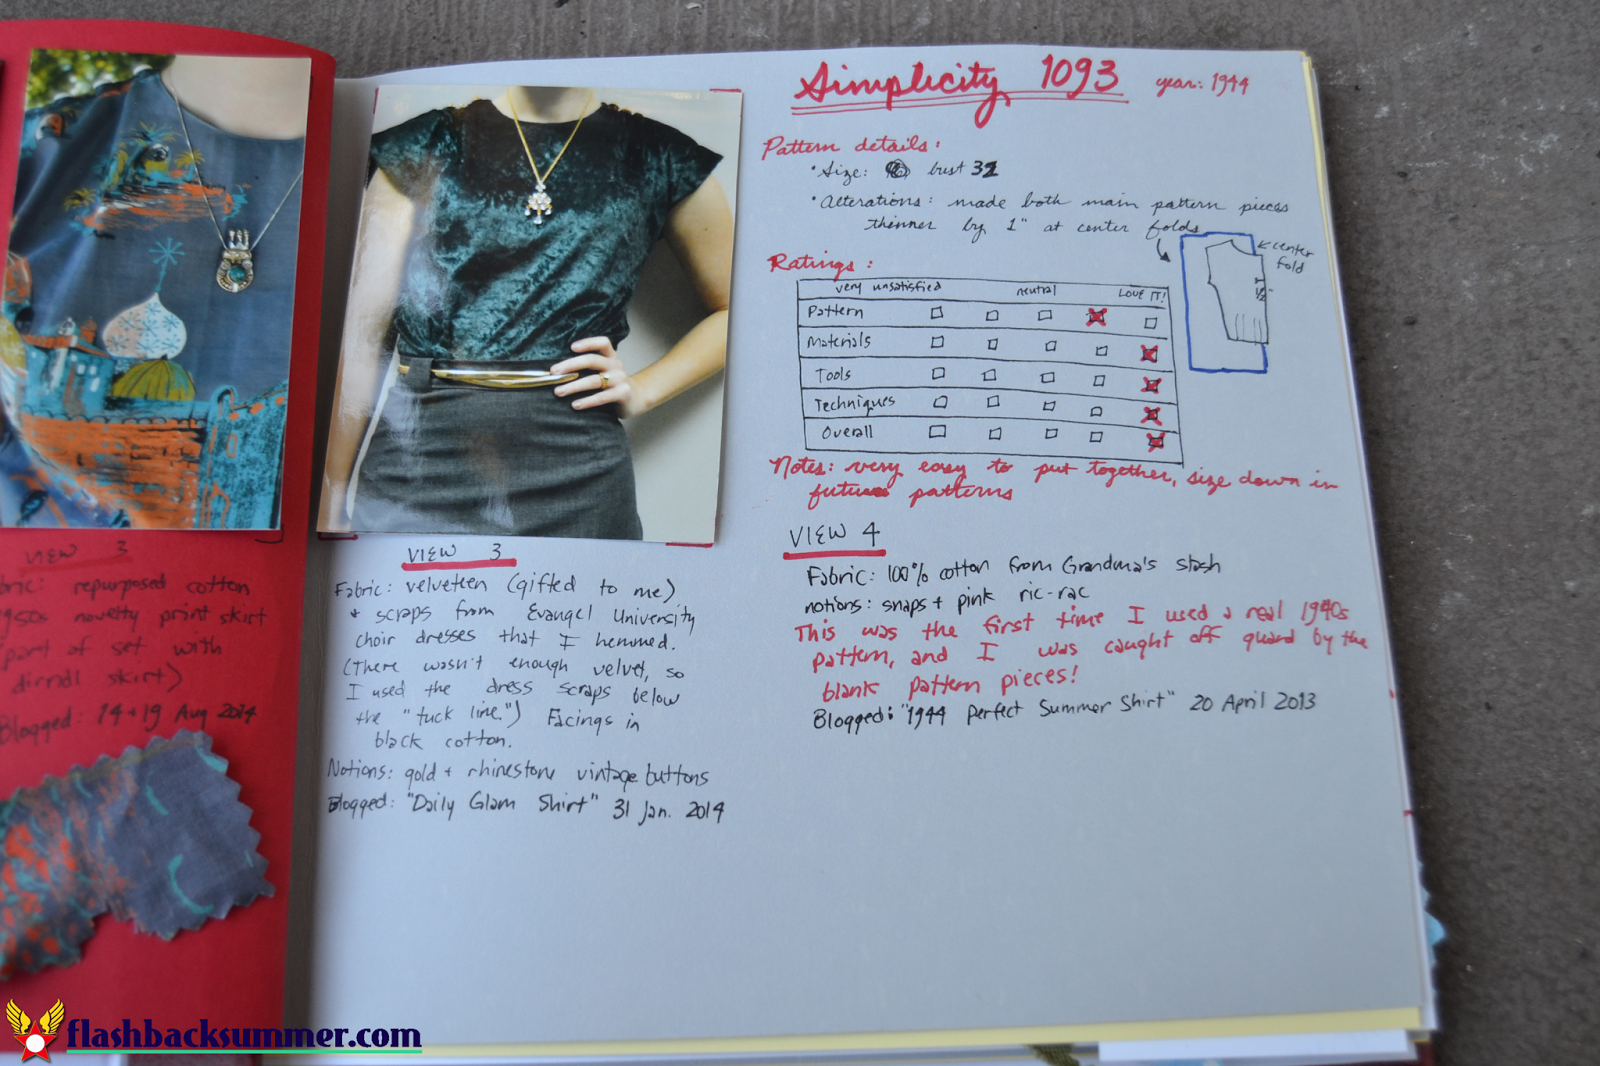 Flashback Summer: Creating a Project Journal - Sewing DIY